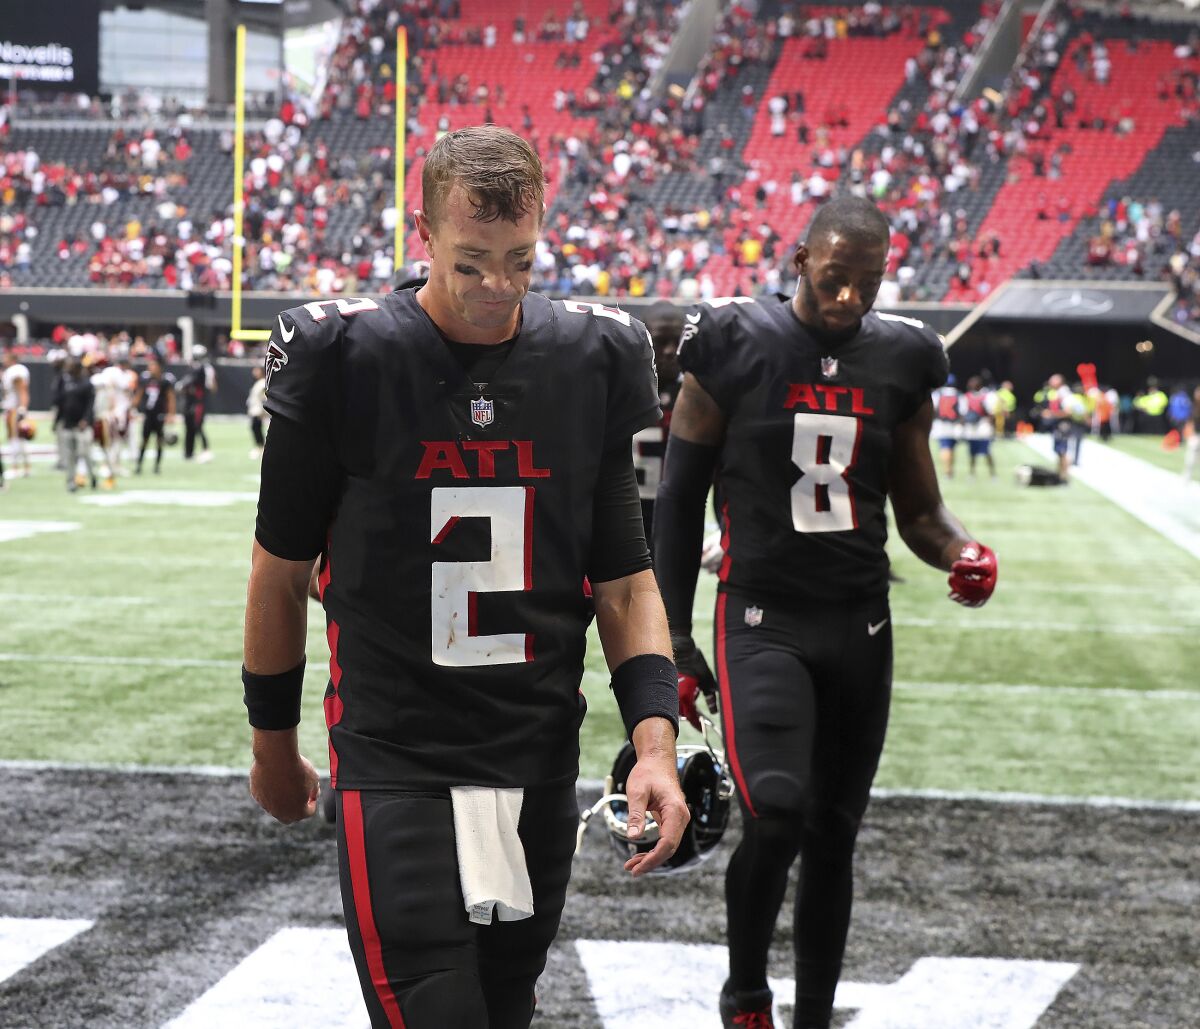 Atlanta Falcons quarterback Matt Ryan (2) and tight end Kyle Pitts (8) walk off the field after losing to the Washington Football Team in an NFL football game on Sunday, Oct. 3, 2021, in Atlanta. (Curtis Compton/Atlanta Journal-Constitution via AP)